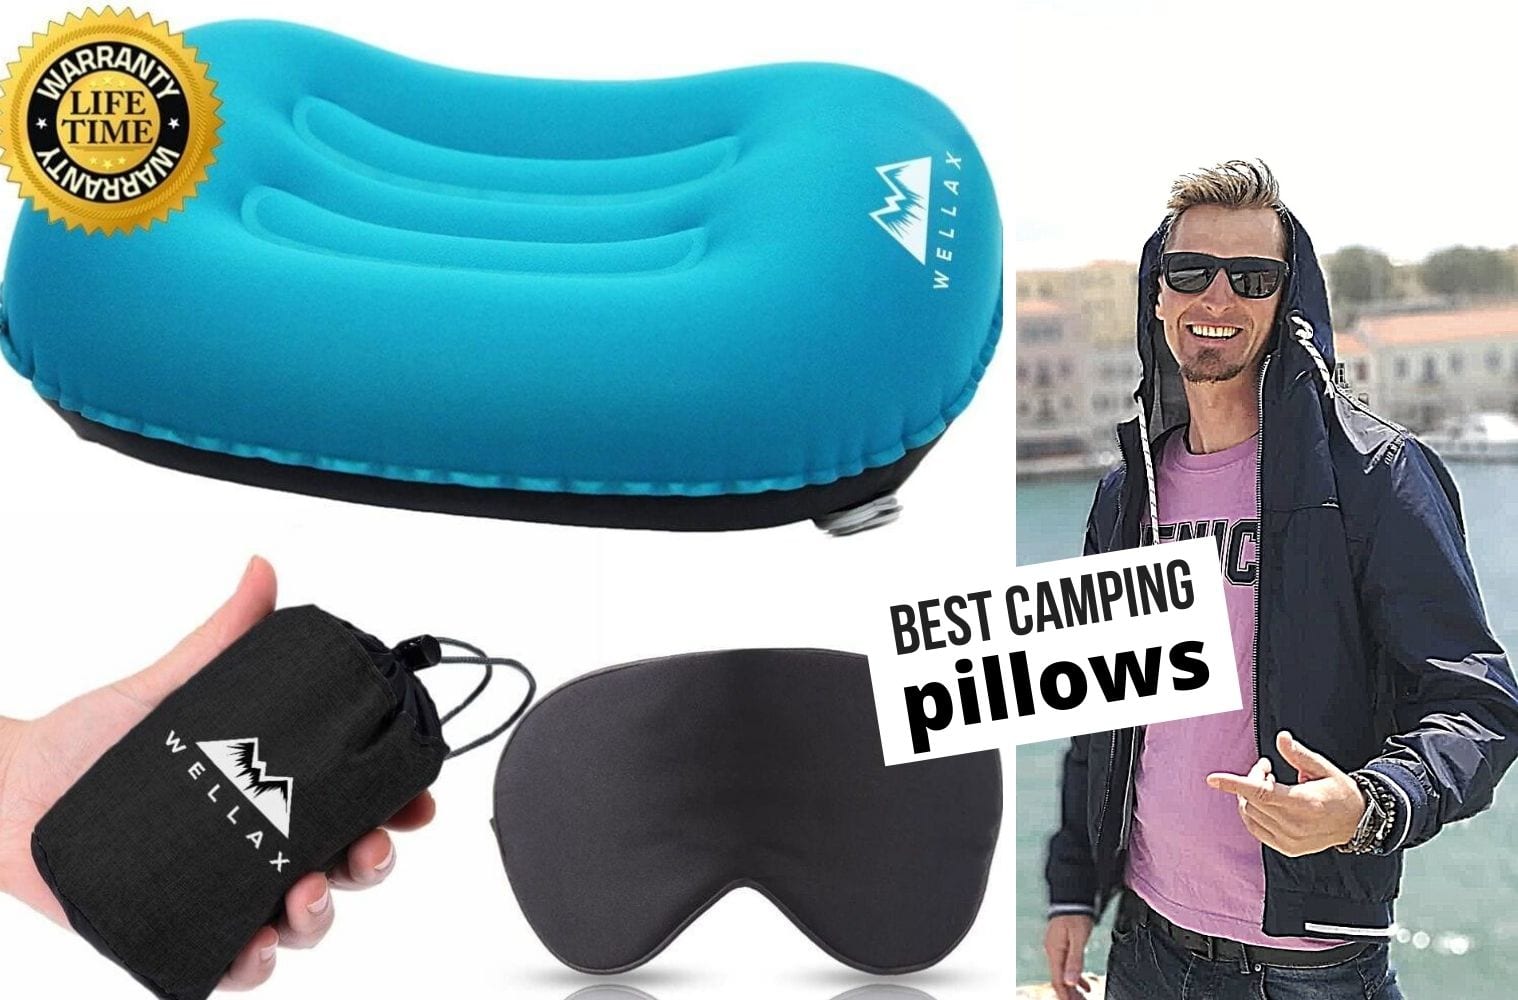 6 Best Camping Pillows to Try in 2022 - [COMPARISON]